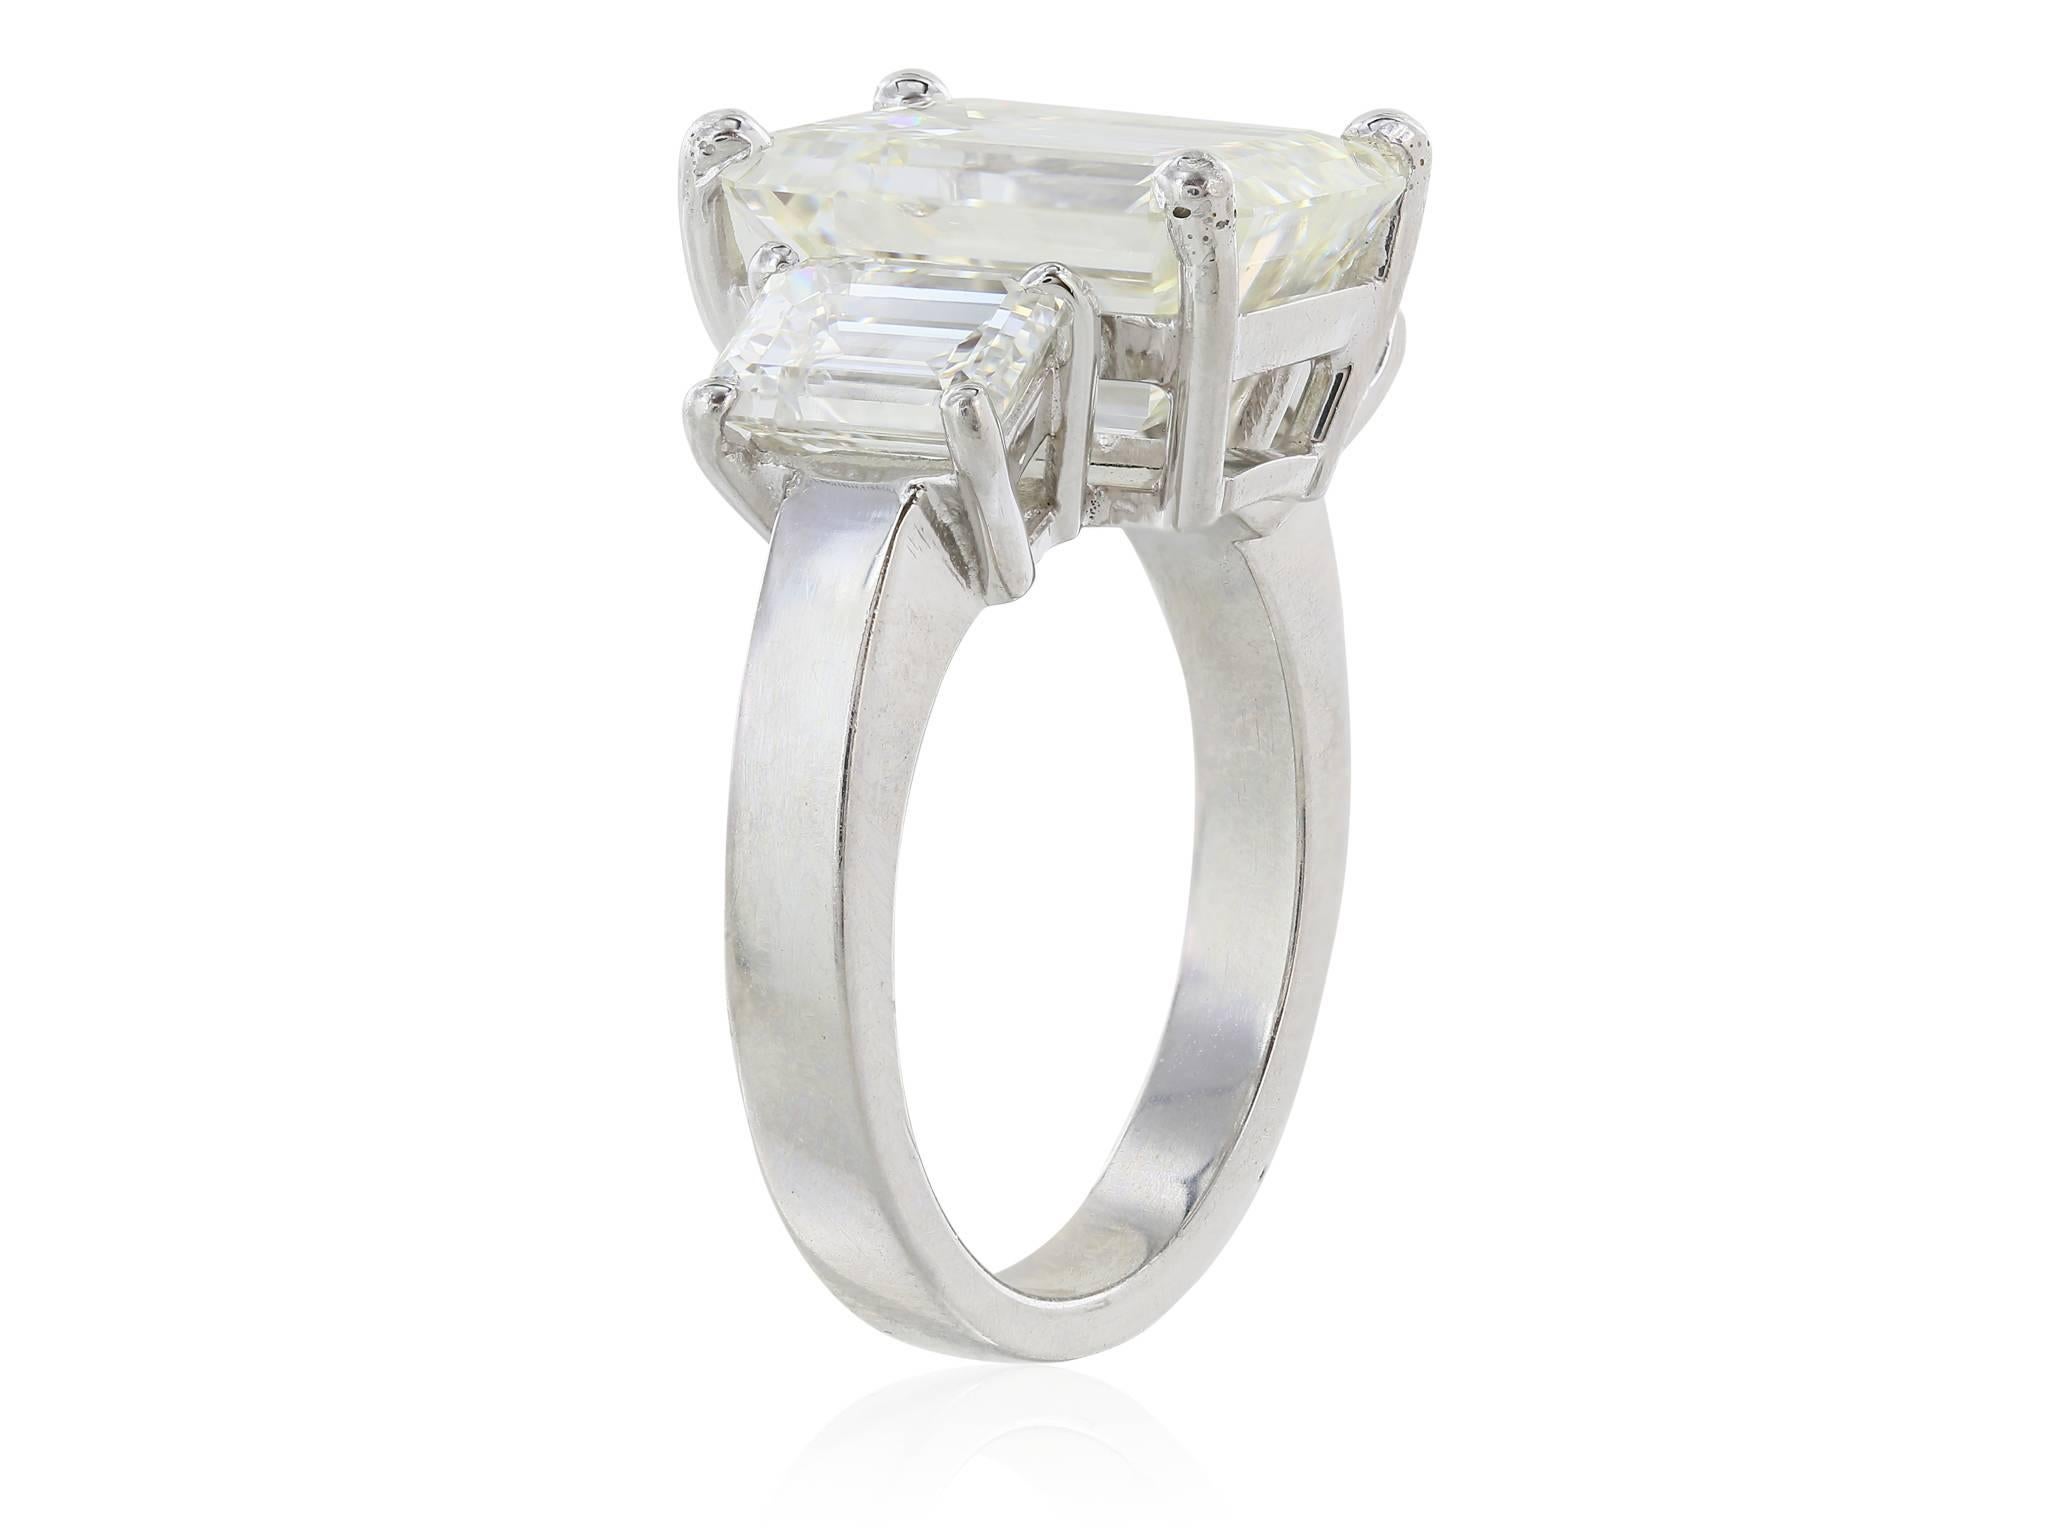 Platinum set three stone diamond ring featuring one GIA certified 6.36 carat emerald cut center stone flanked by two emerald cut side stones weighing approximately 1.90 carats total.  The diamonds have a color of J and a clarity of VS2. GIA cert